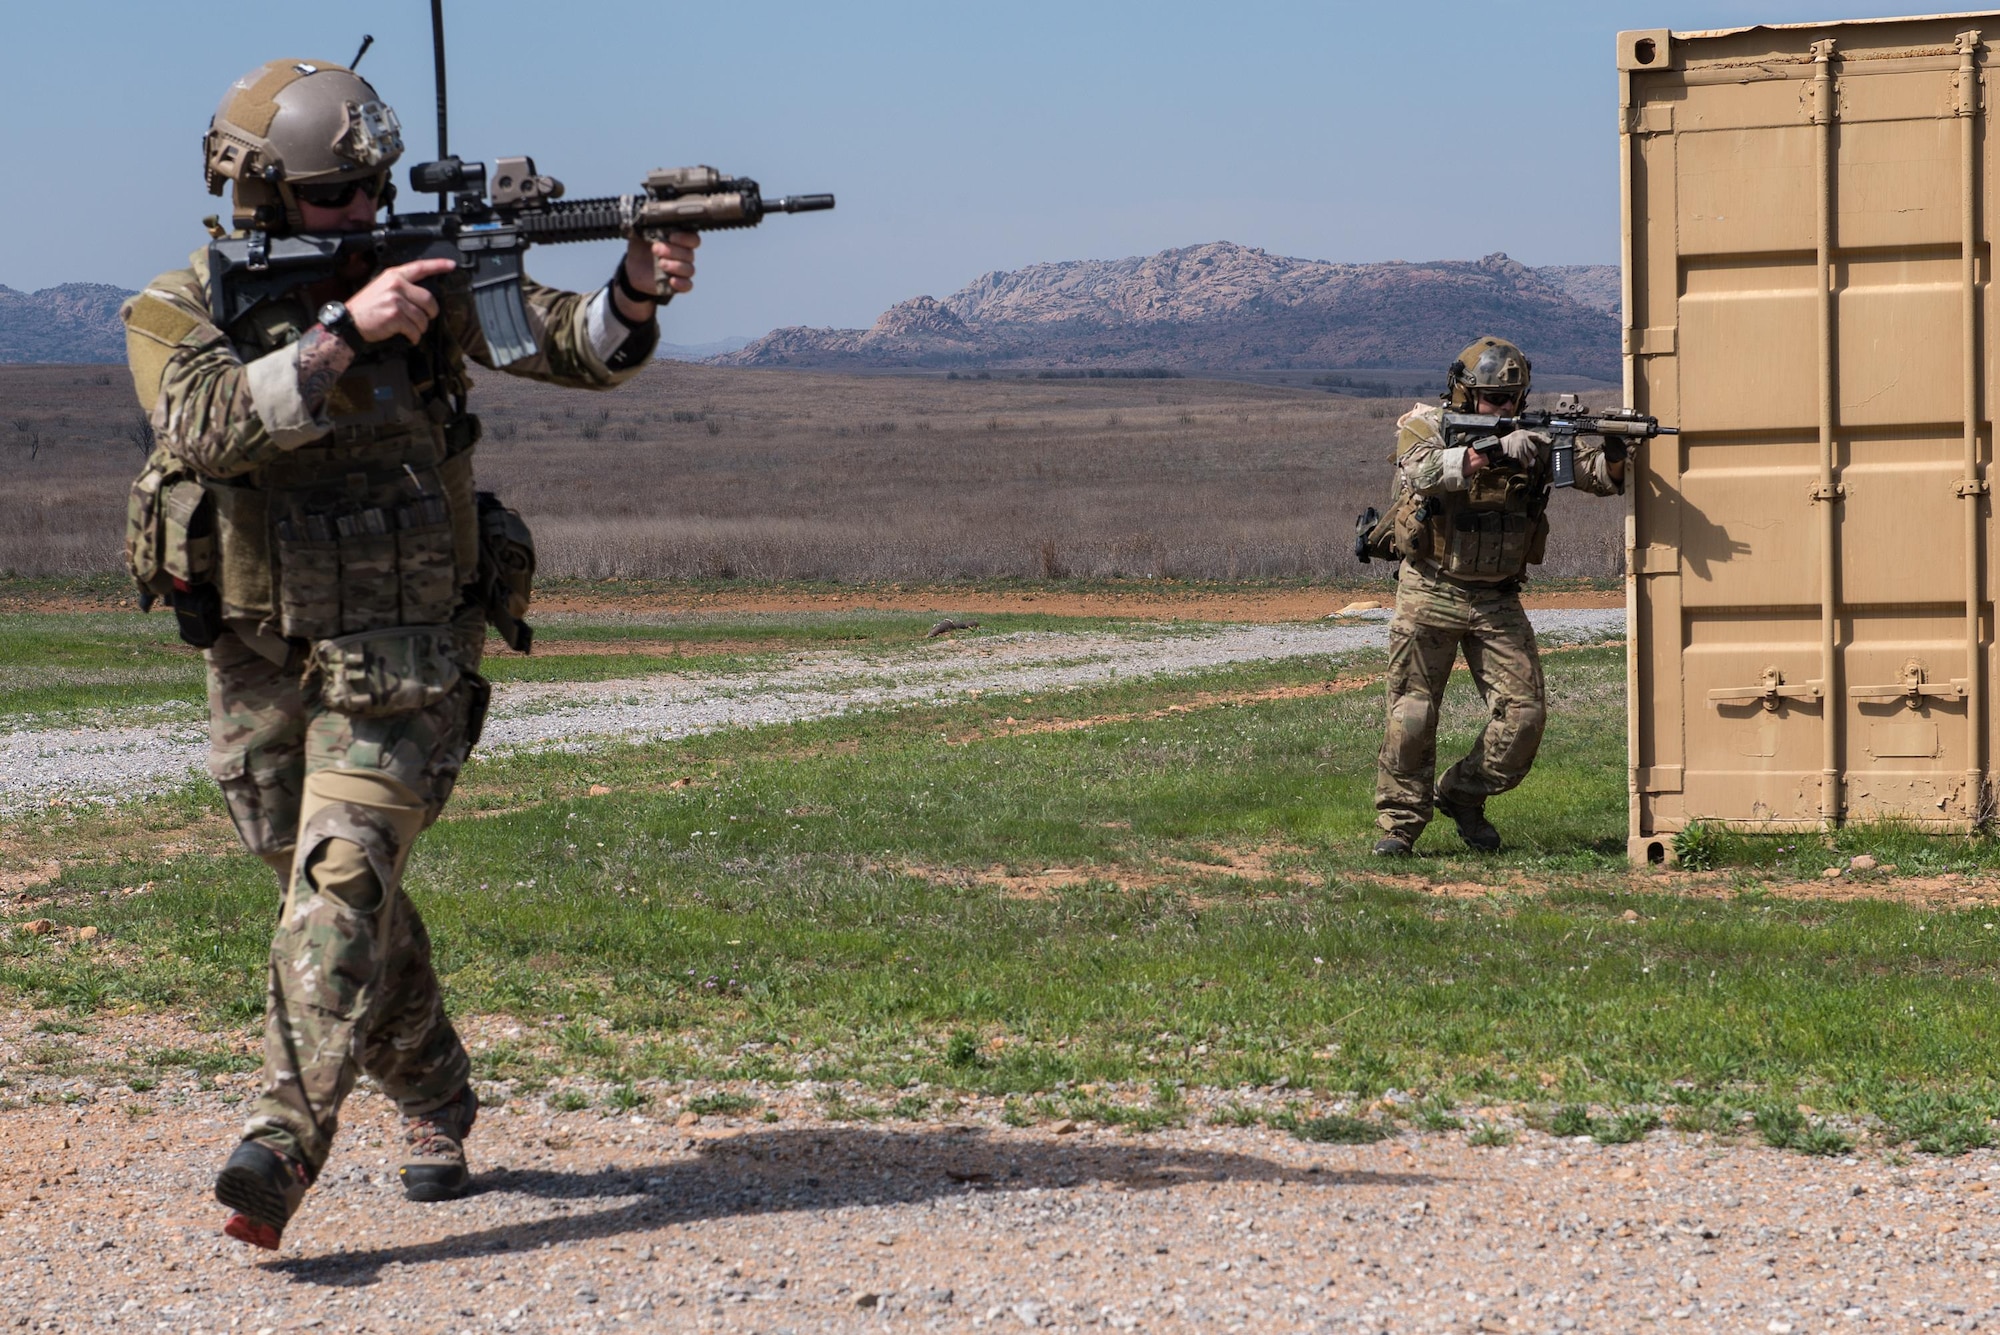 Special Tactics Airmen from the 123rd Special Tactics Squadron, Kentucky Air National Guard, maneuver through multiple training scenarios at Falcon Bombing Range, Fort Sill, Okla., March 22, 2017. The 137th Air Support Element from the 137th Special Operations Wing, Oklahoma City, coordinated a joint training event with the 123rd Special Tactics Squadron, Kentucky Air National Guard, Air Force Reserve F-16 Fighting Falcons from the 301st Fighter Wing and T-38 Talons from the 88th Fighter Training Squadron, Sheppard Air Force Base, March 20-23, 2017. (U.S. Air National Guard photo by Senior Master Sgt. Andrew M. LaMoreaux/Released)